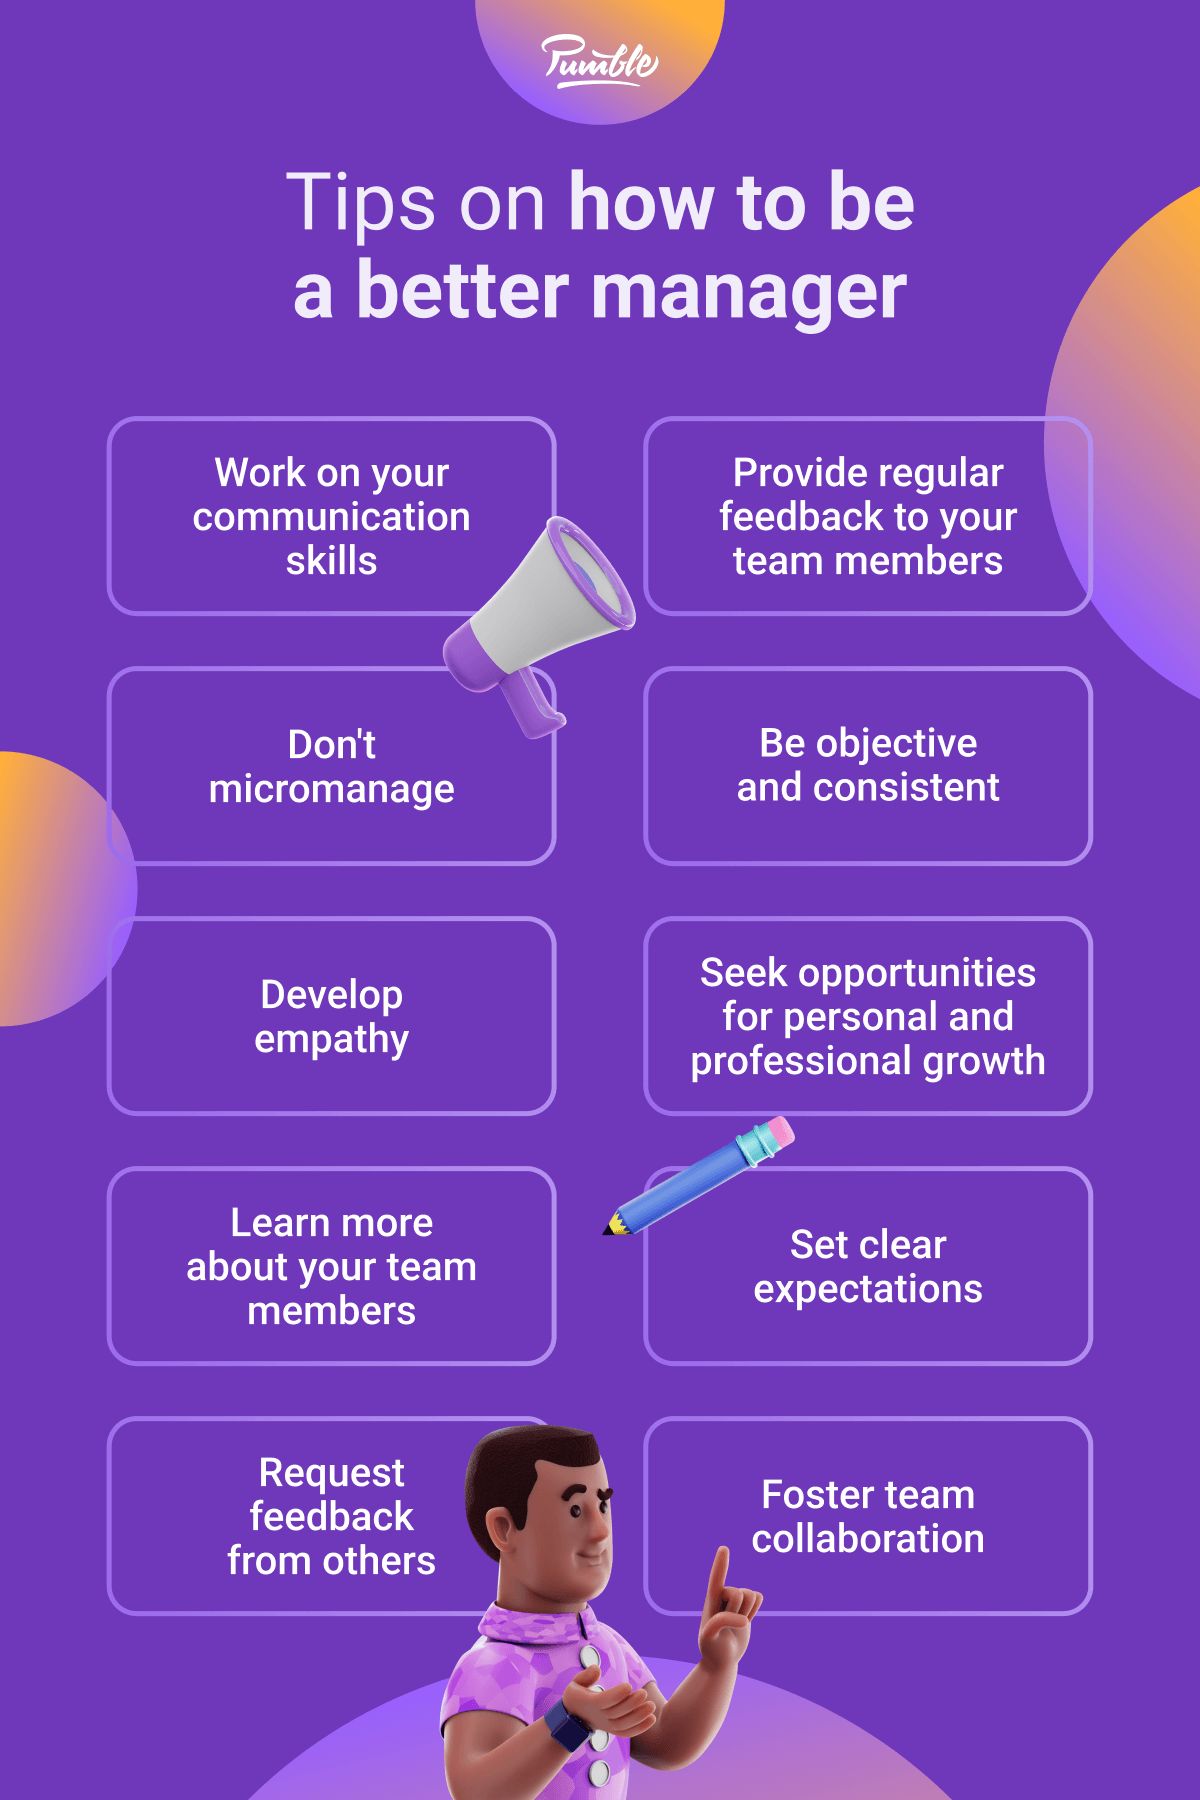 Tips on how to be a better manager